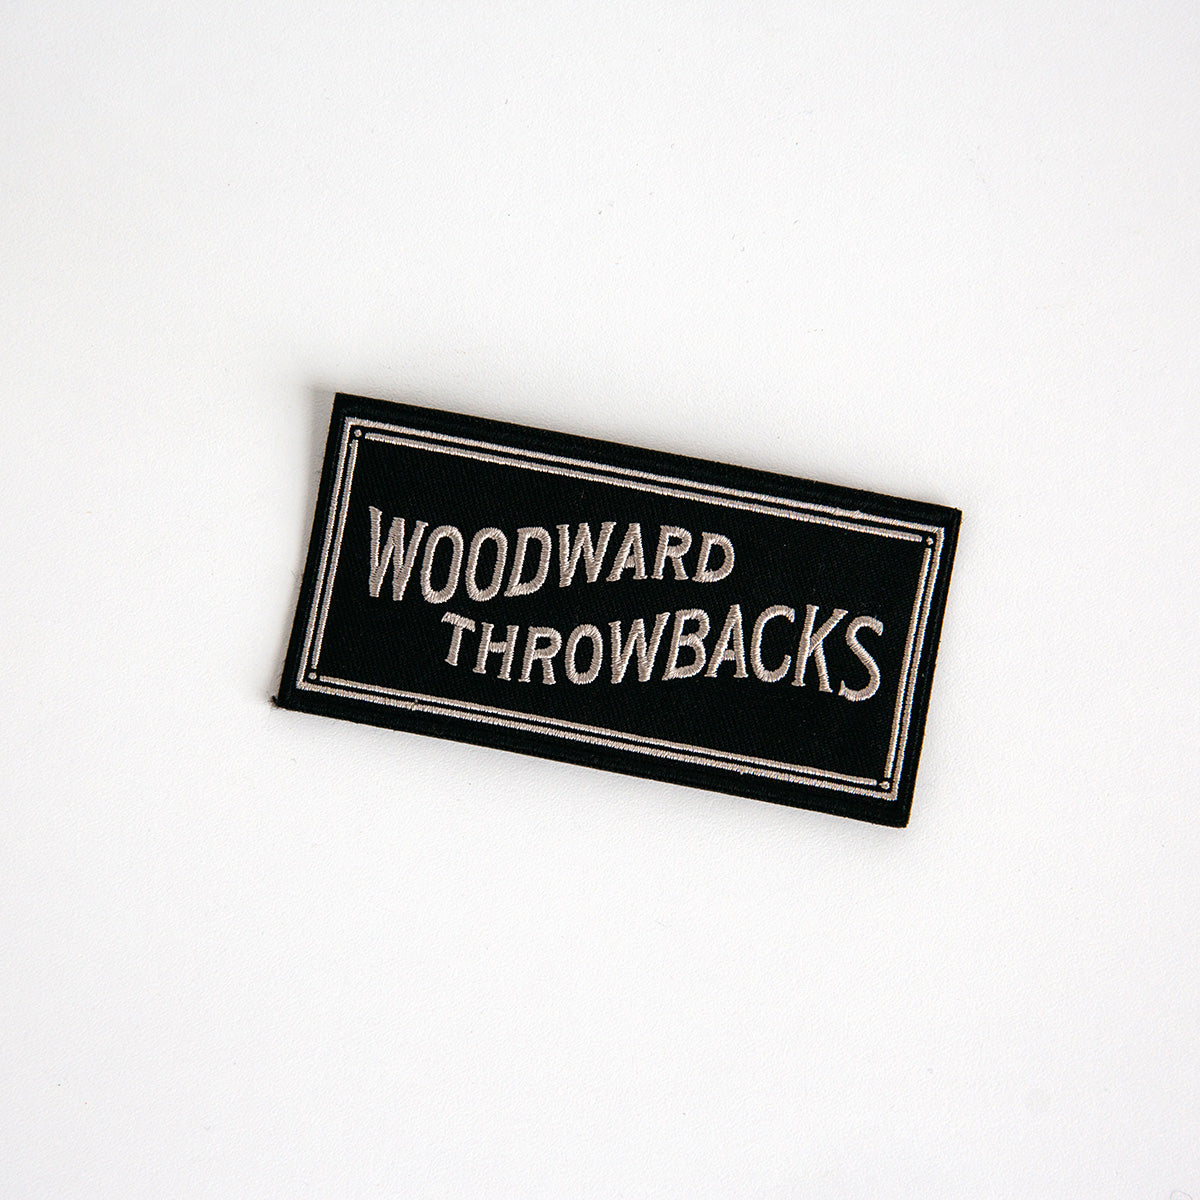 Woodward Throwbacks Patch - Made in Detroit